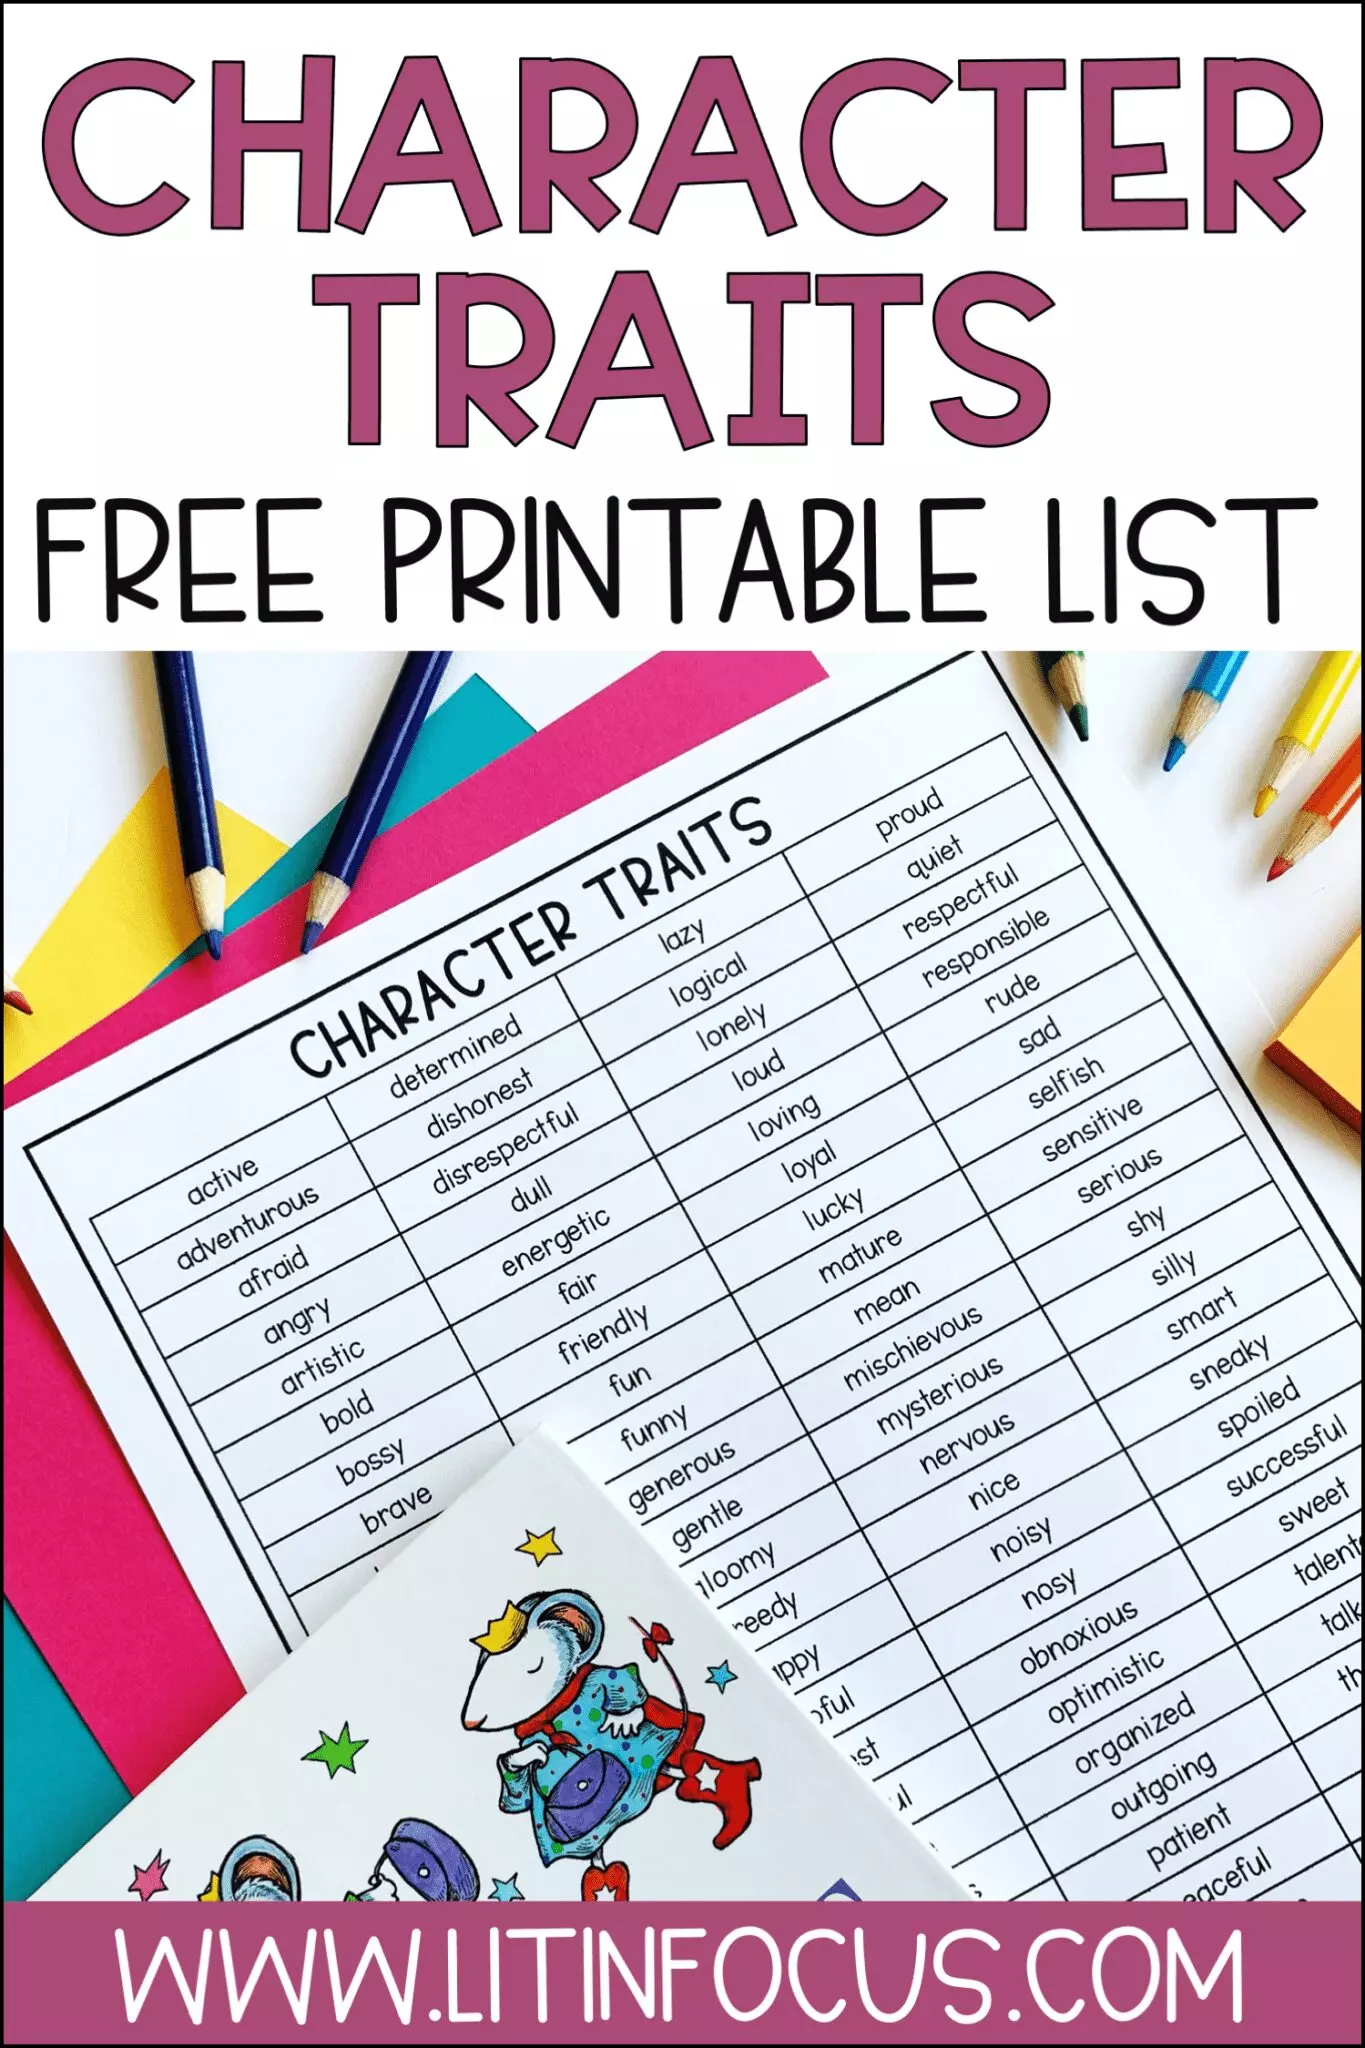 100 Character Traits List Free Printable PDF - Literacy In Focus